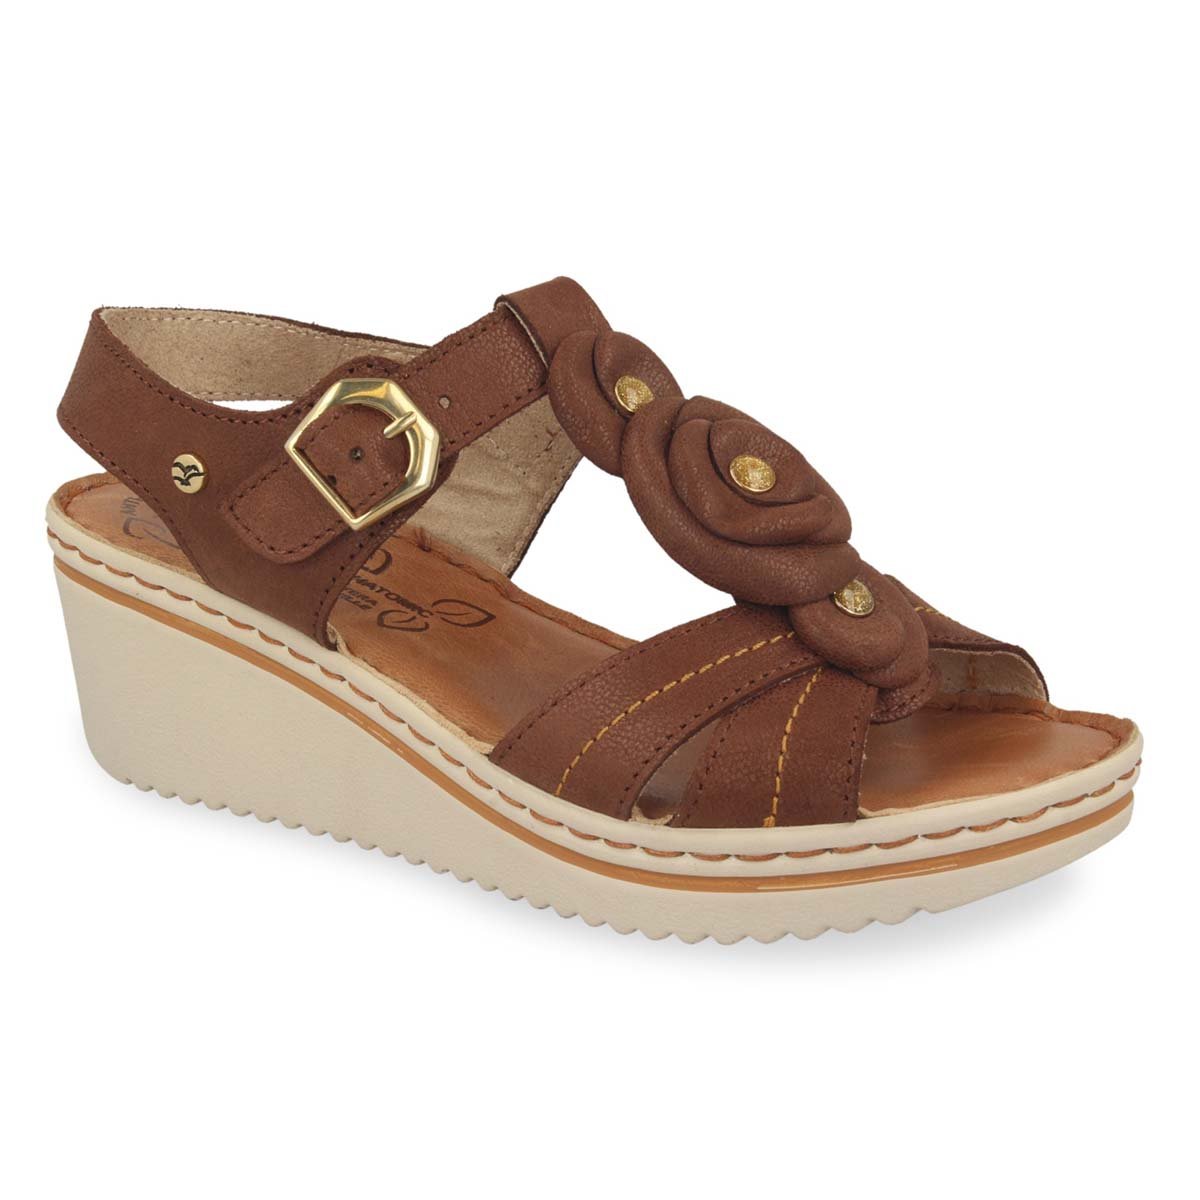 See the Flower Leather Wedge Back Strap Women Sandals With Anti-Shock Cushioned Leather Insole in the colour BROWN, available in various sizes